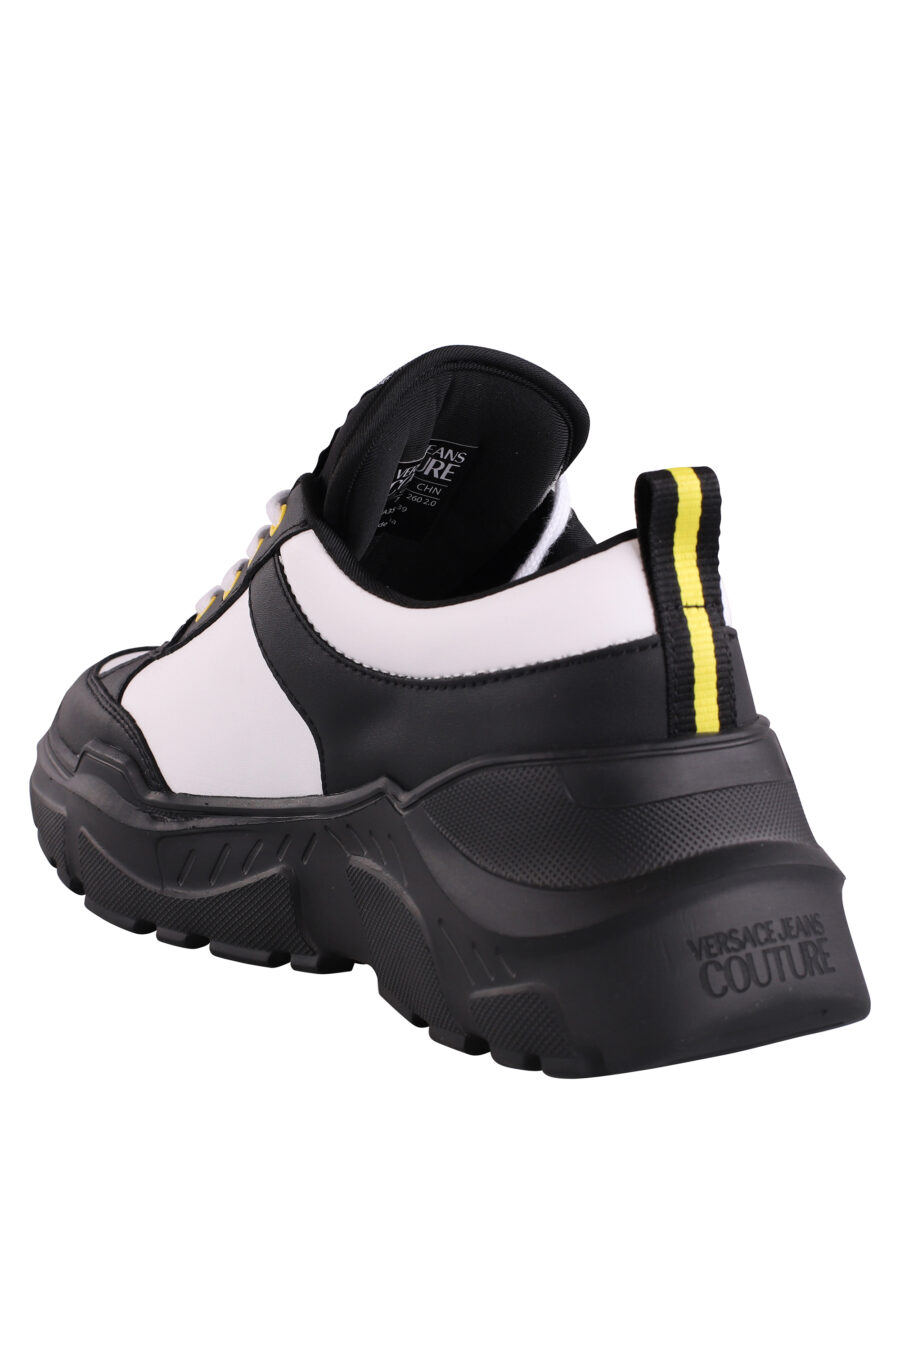 Black and white bicolour trainers with logo and yellow detail - IMG 9070